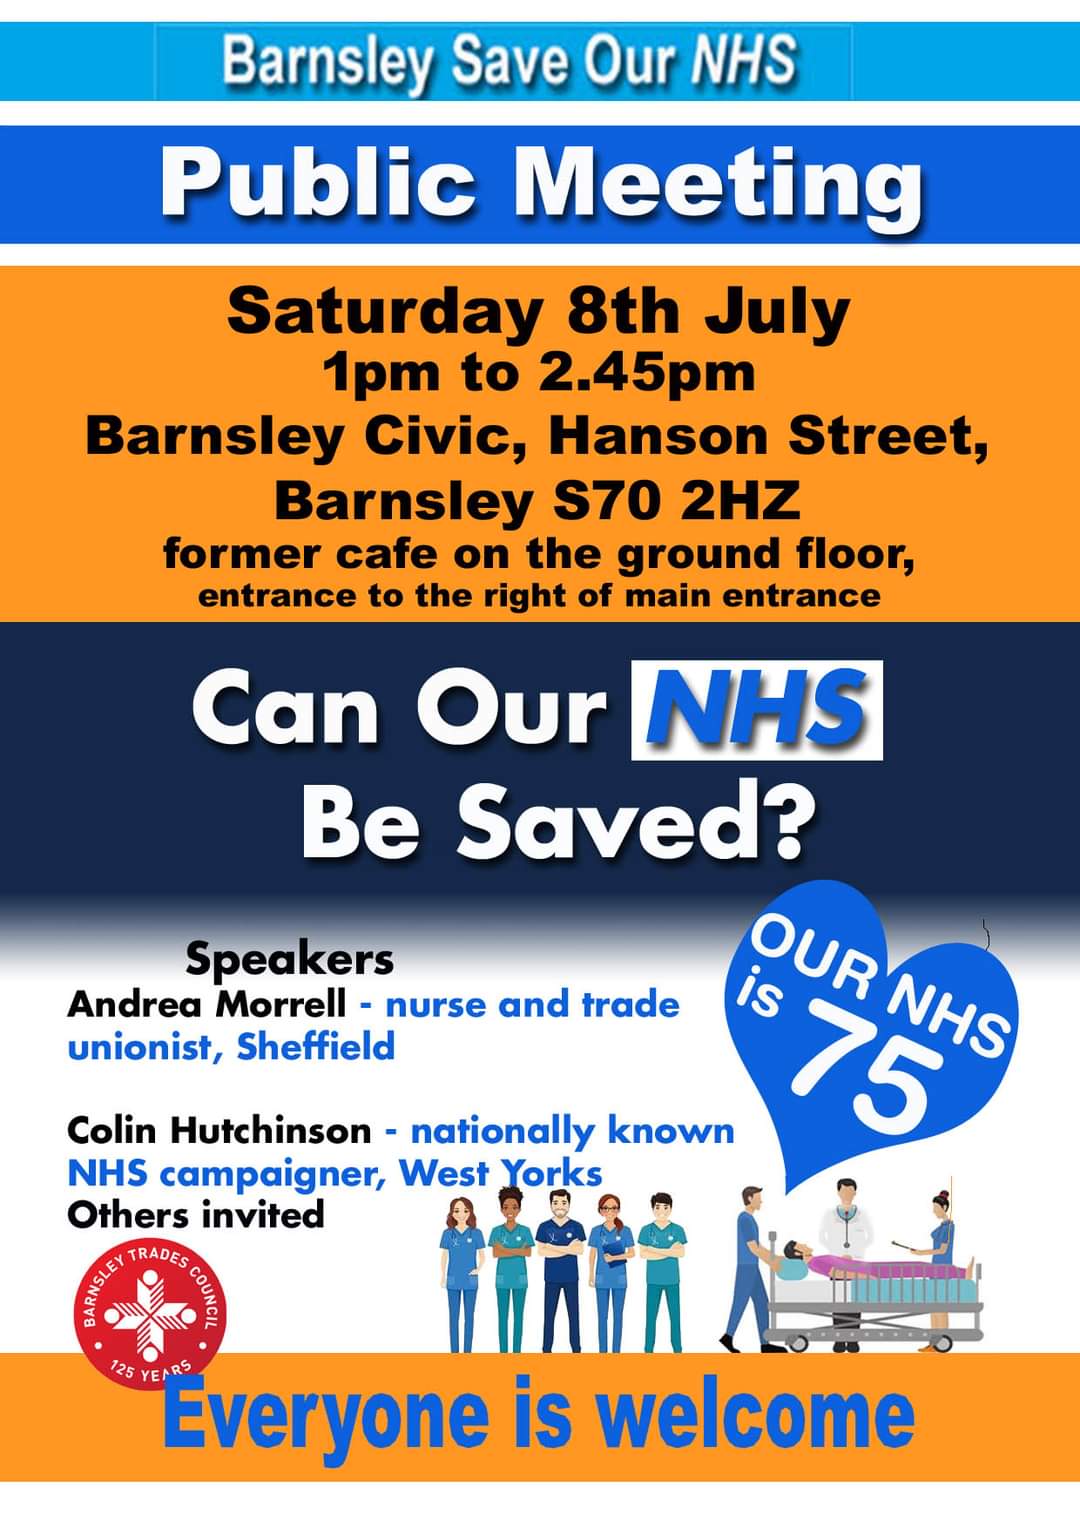 Barnsley Save our NHS Public meeting